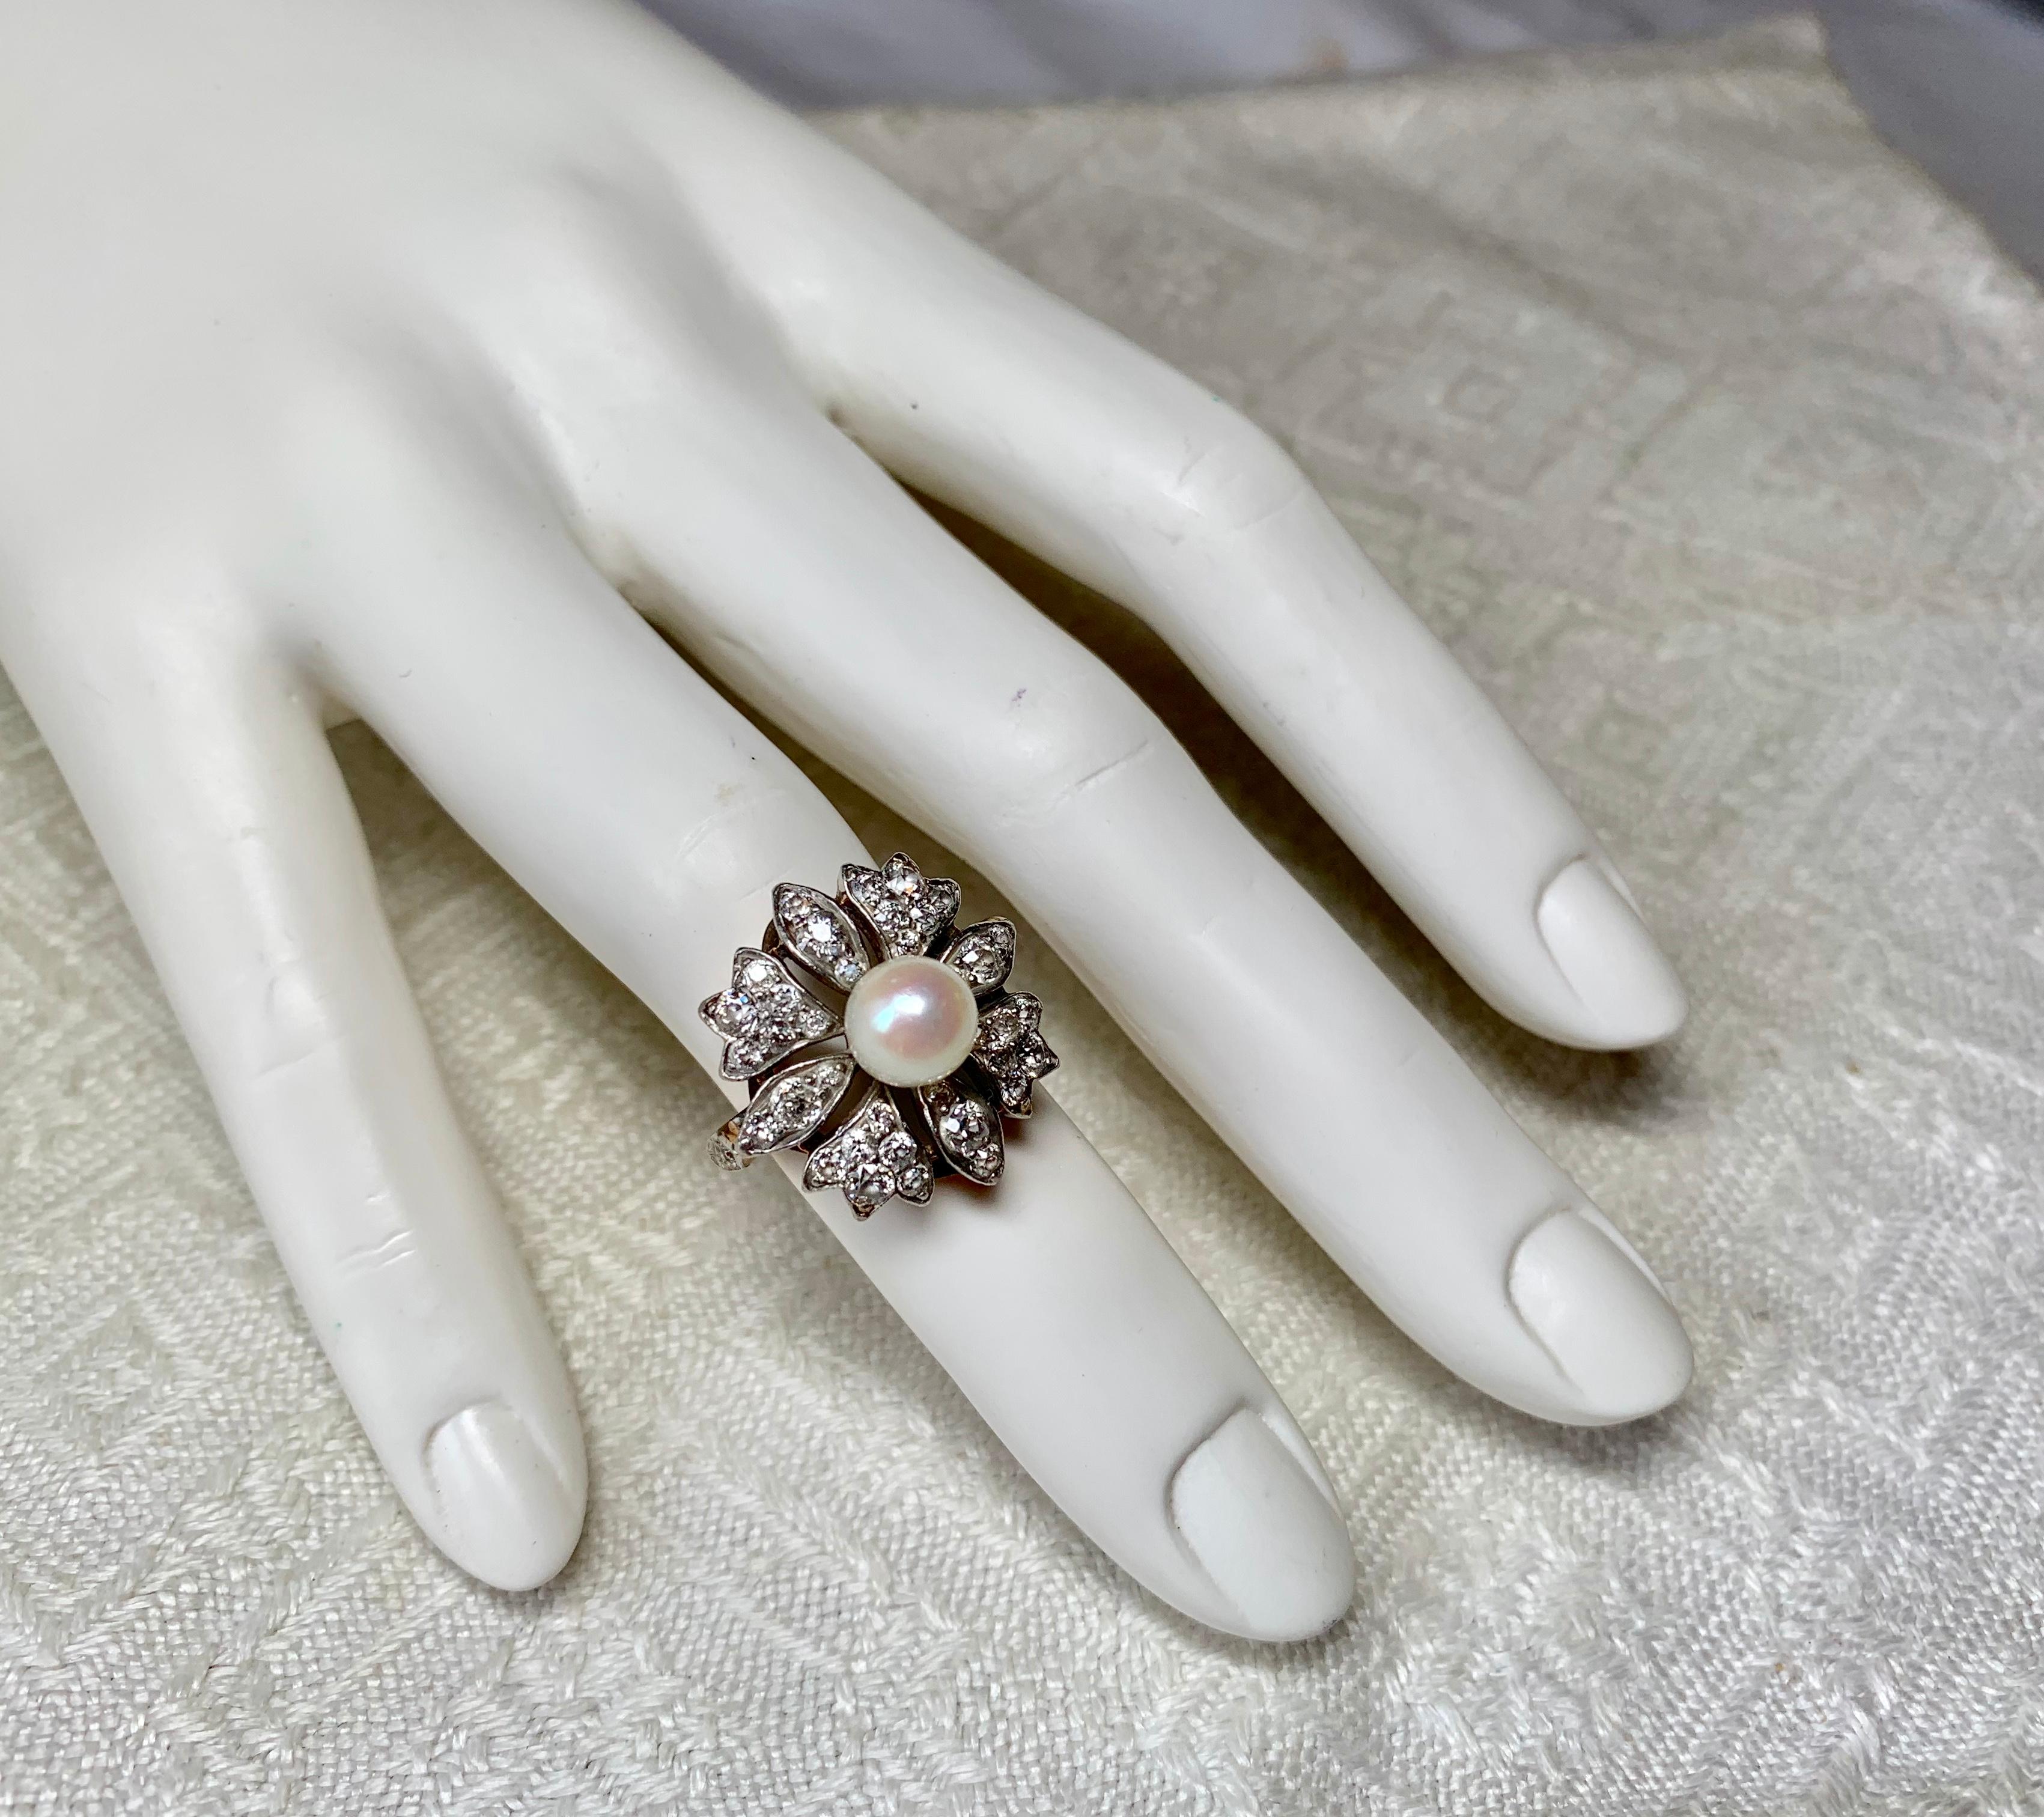 This is a stunning antique Victorian two carat Old Mine Cut Diamond ring with a central 7MM Pearl.  The jewels are set in Platinum atop 14 Karat Gold in a Flower Motif of great beauty.  The flower is set with 38 gorgeous Old Mine Cut Diamonds. 